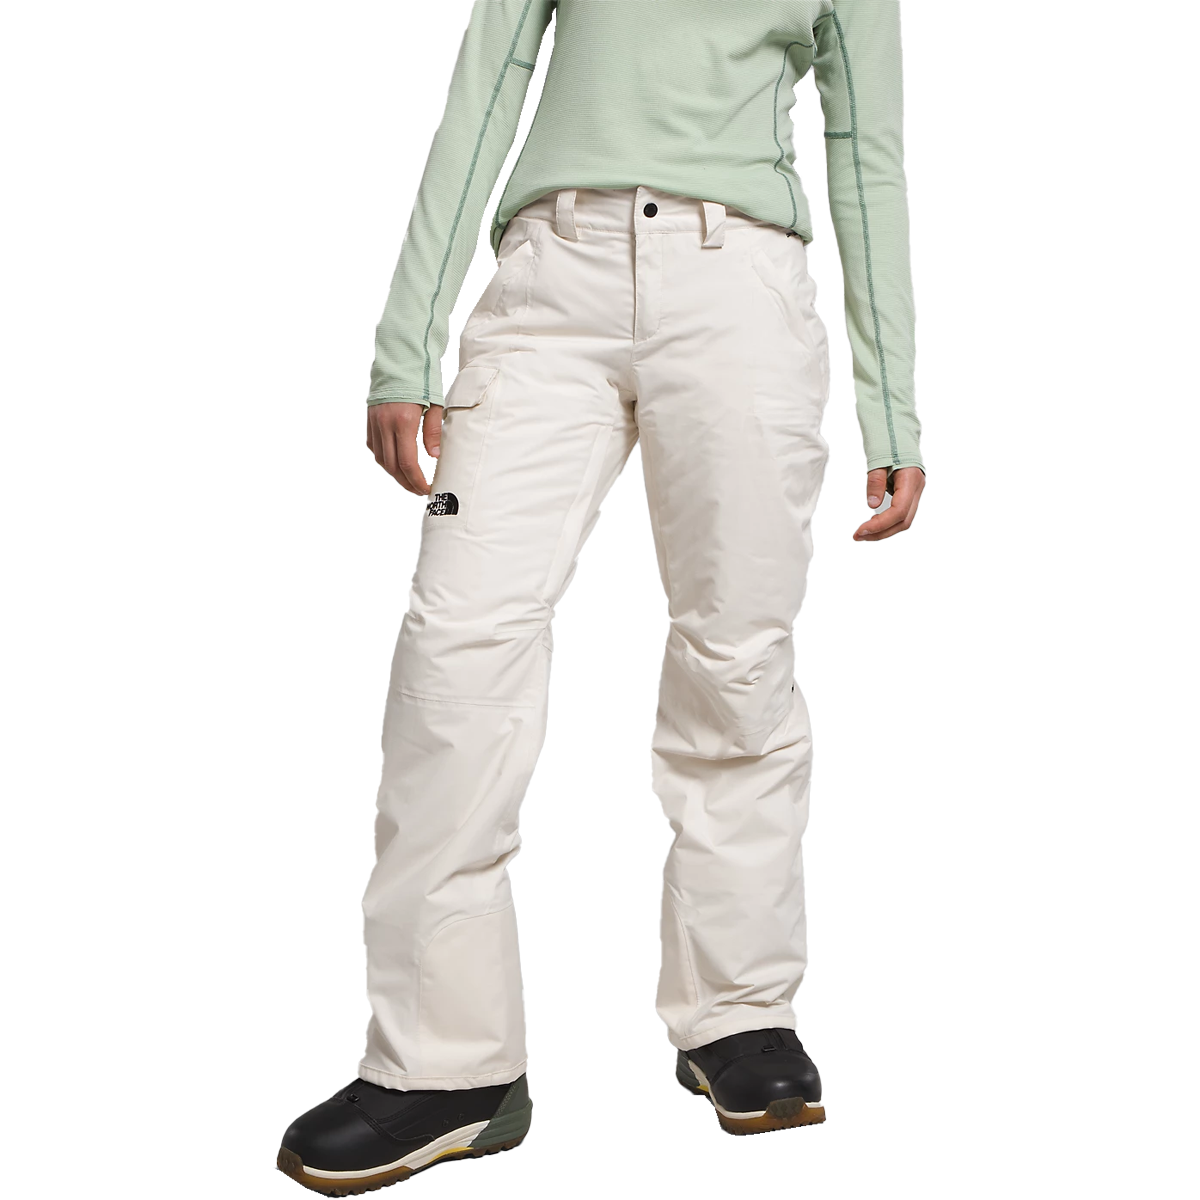 Women's Freedom Insulated Pant - Long alternate view